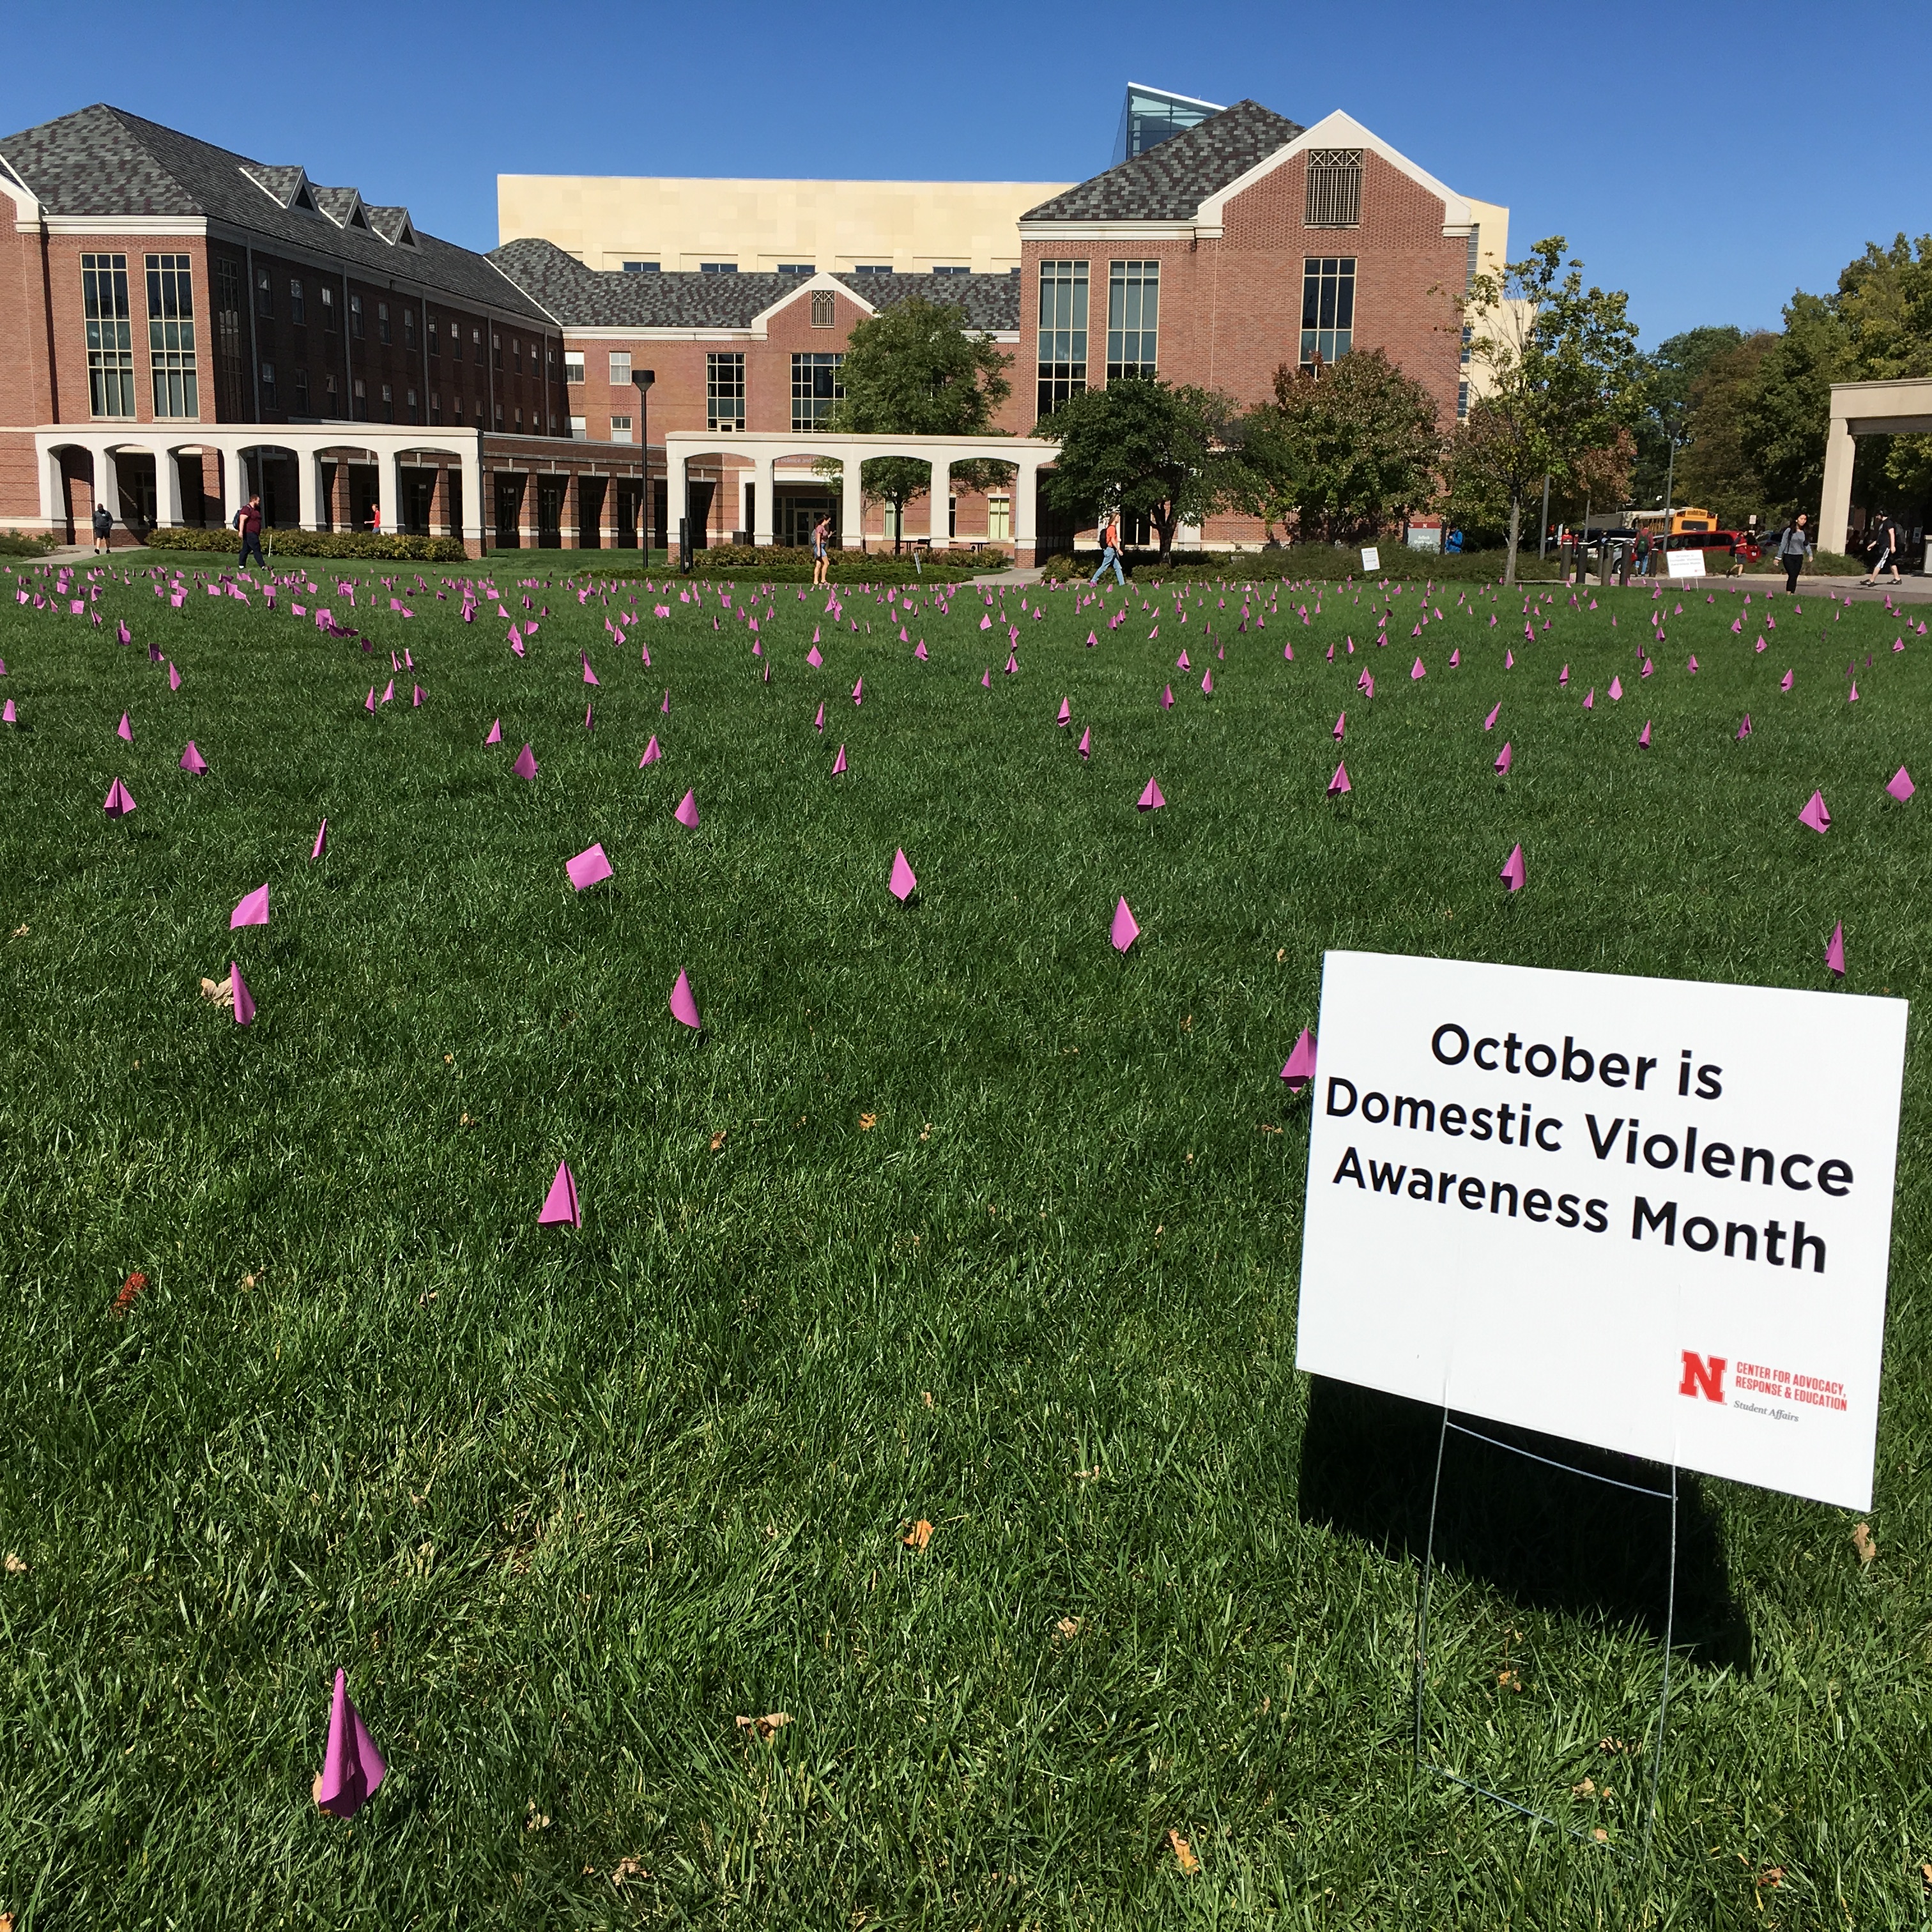 The Center for Advocacy, Response & Education (CARE) placed purple flags across the Union green space for Domestic Violence Awareness Month.